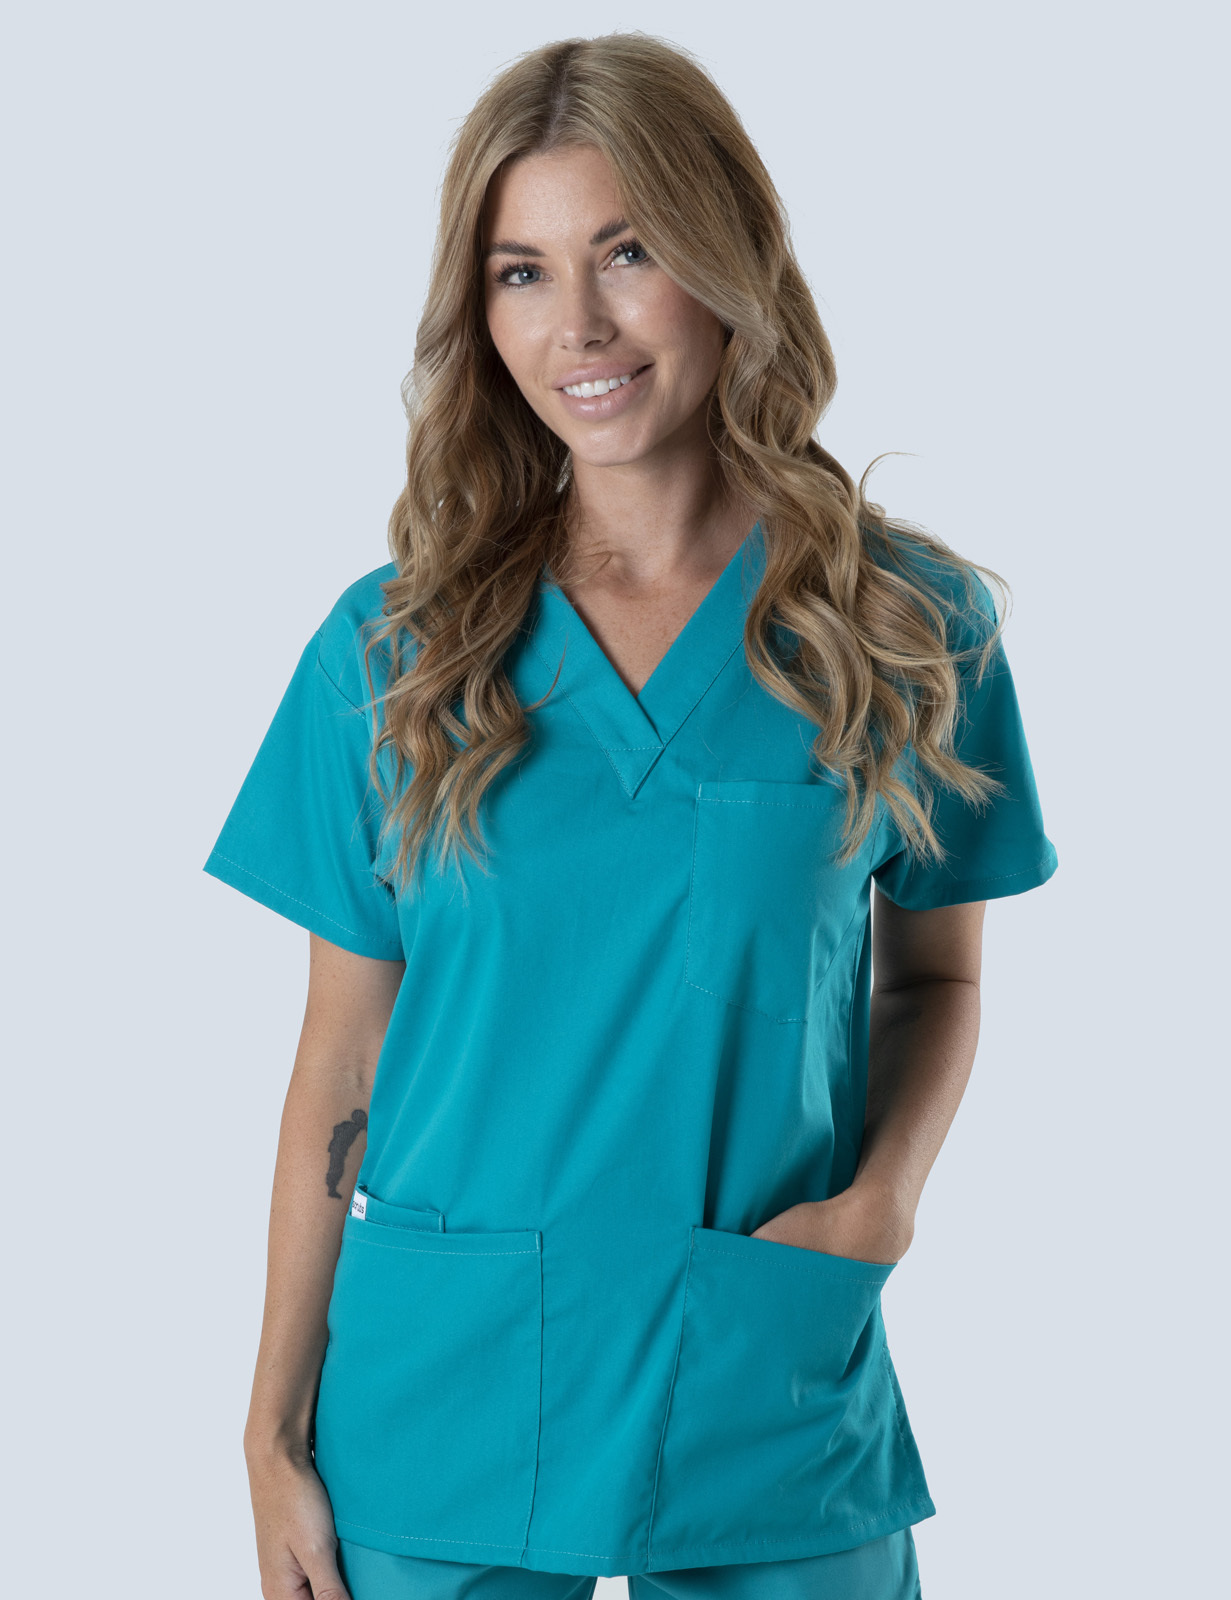 Prince Charles Hospital - ED RN (4 Pocket Scrub Top and Cargo Pants in Teal incl Logos)